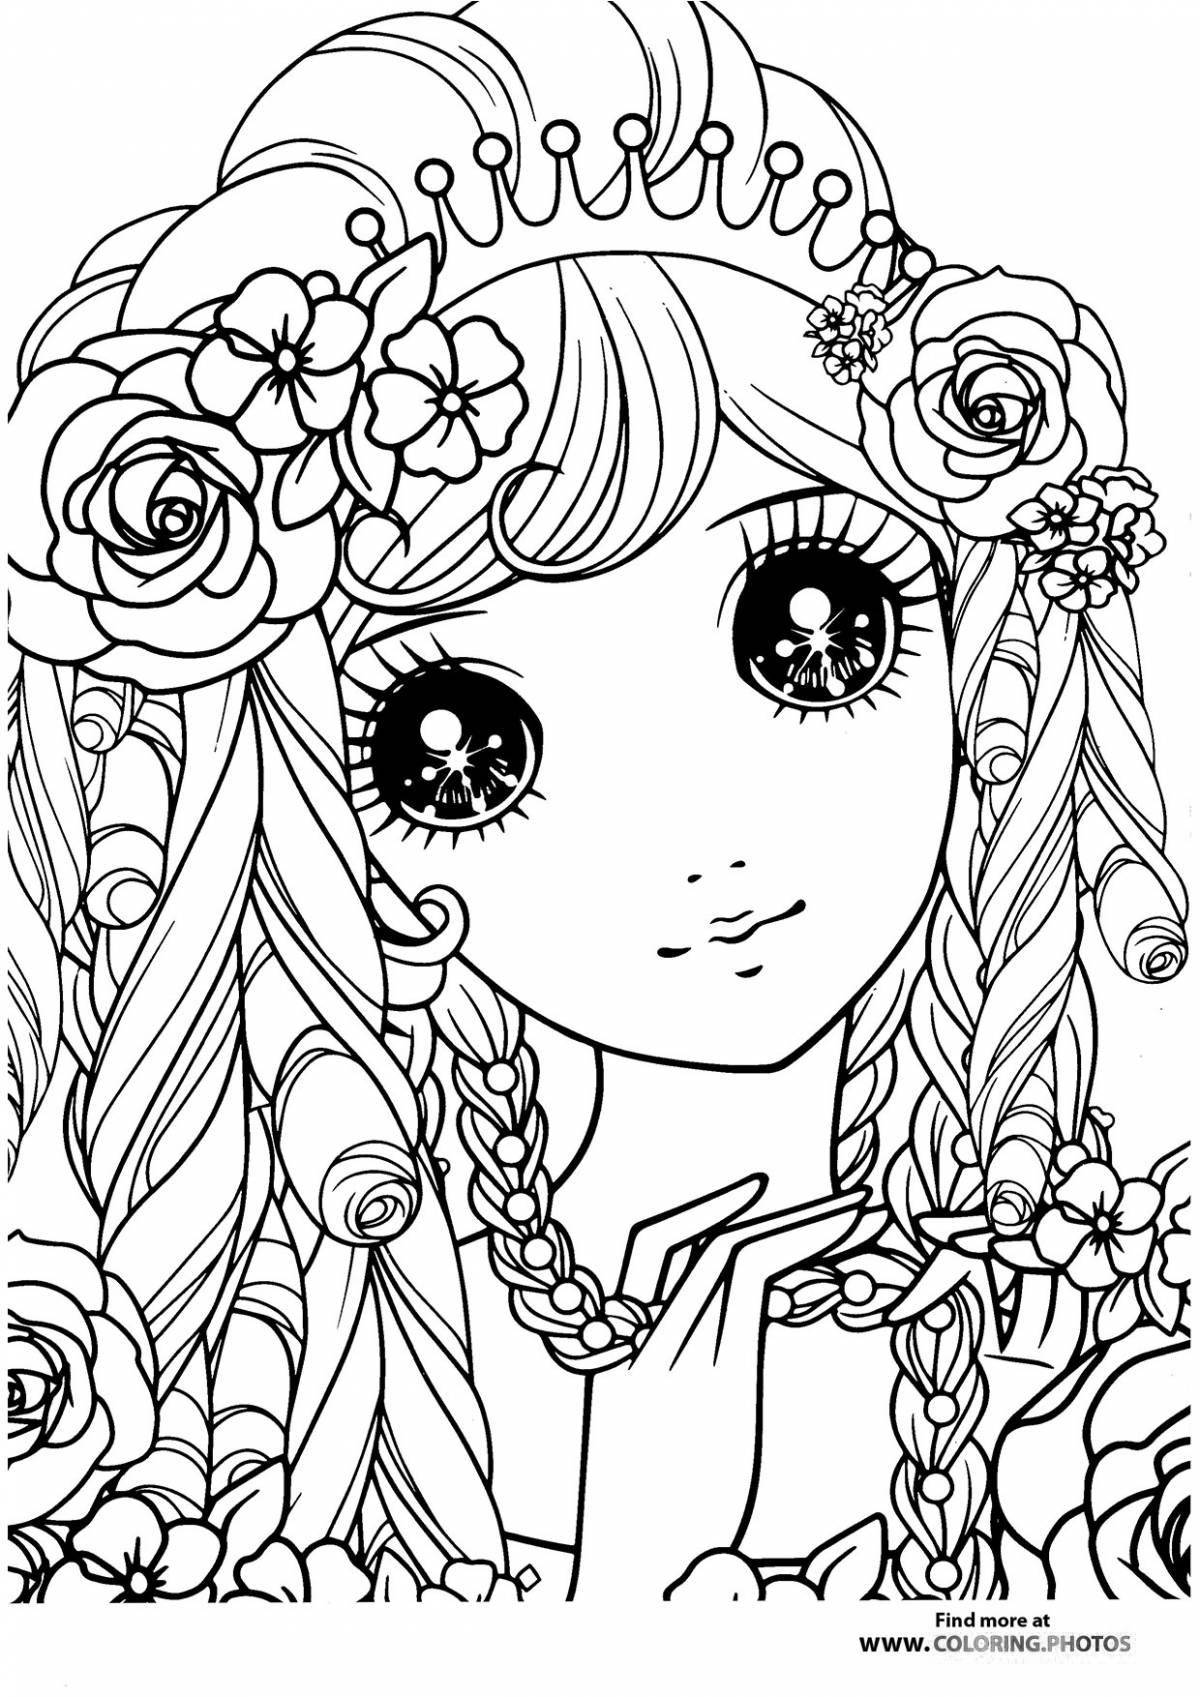 Fun coloring for girls 15-17 years old